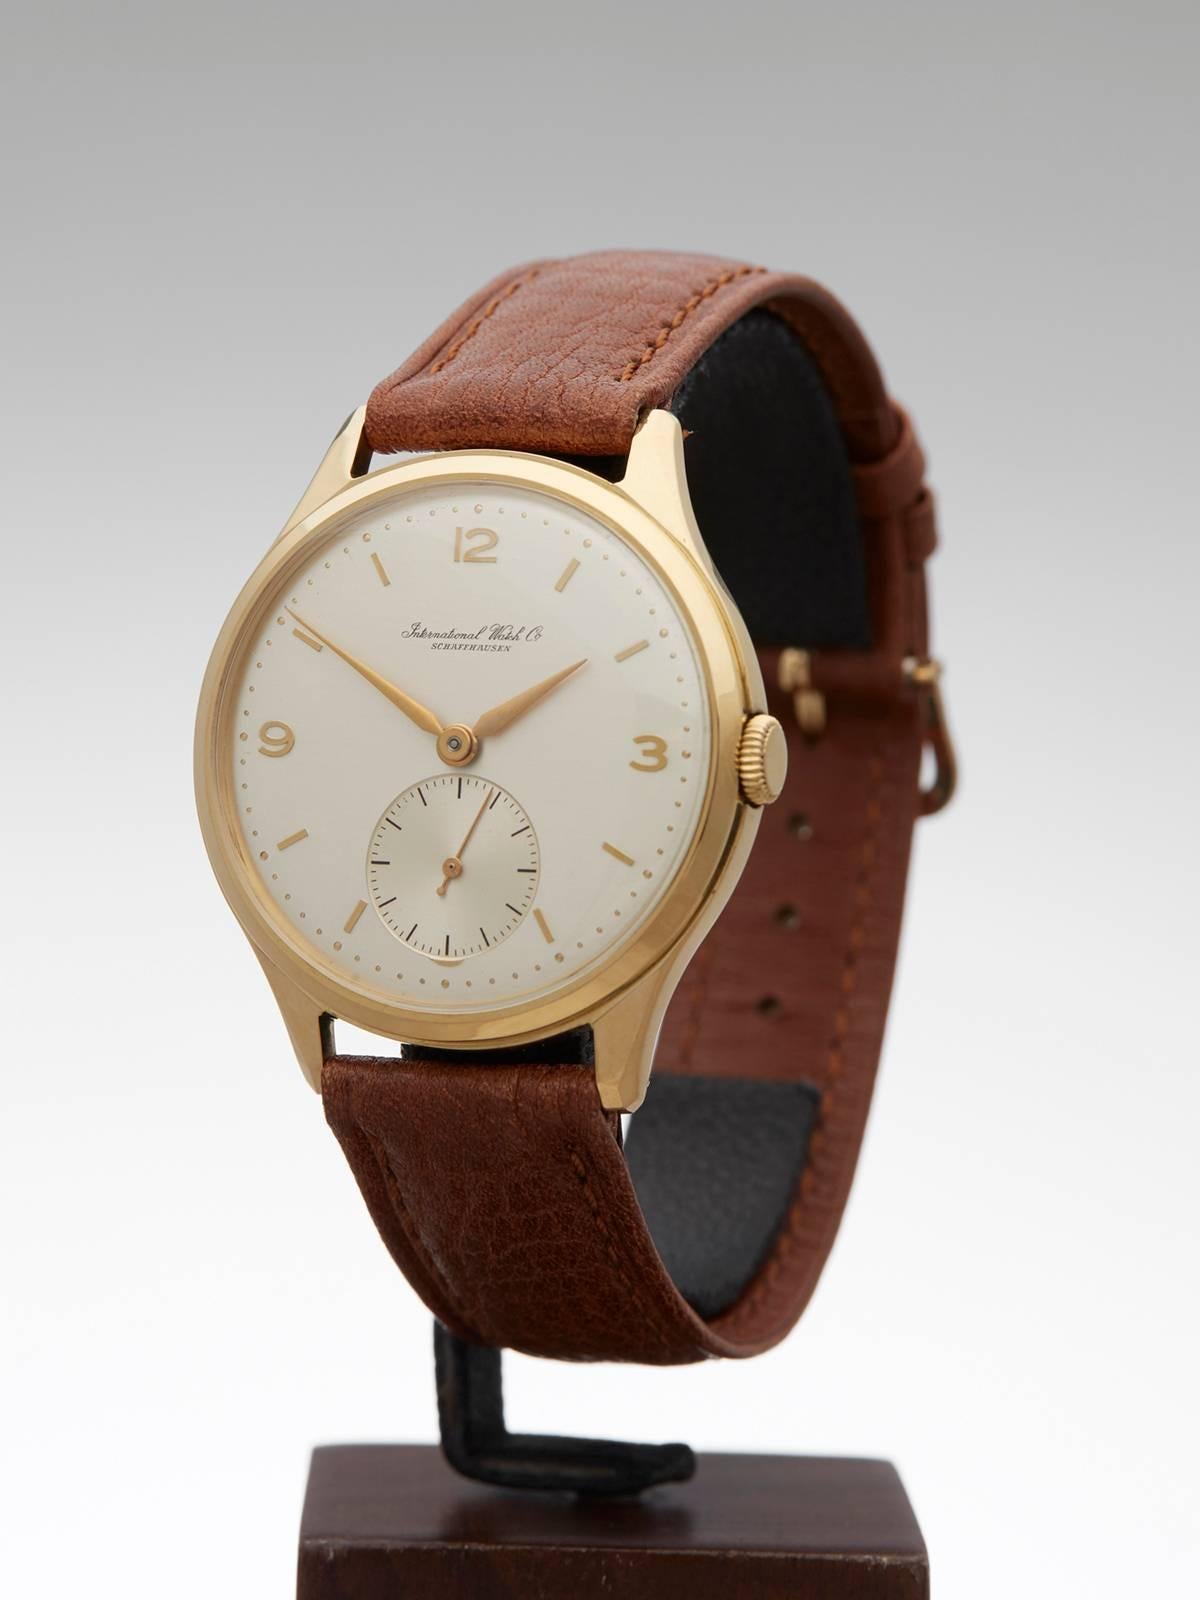 Ref: COM782
Condition: 9 - Excellent condition
Age: 1951
Case Diameter: 36 mm
Case Size: 36mm
Box and Papers: Box Only
Movement: Mechanical Wind
Case: 18k Yellow Gold
Dial: Silver Baton
Bracelet: Brown leather
Strap Length: Adjustable up to